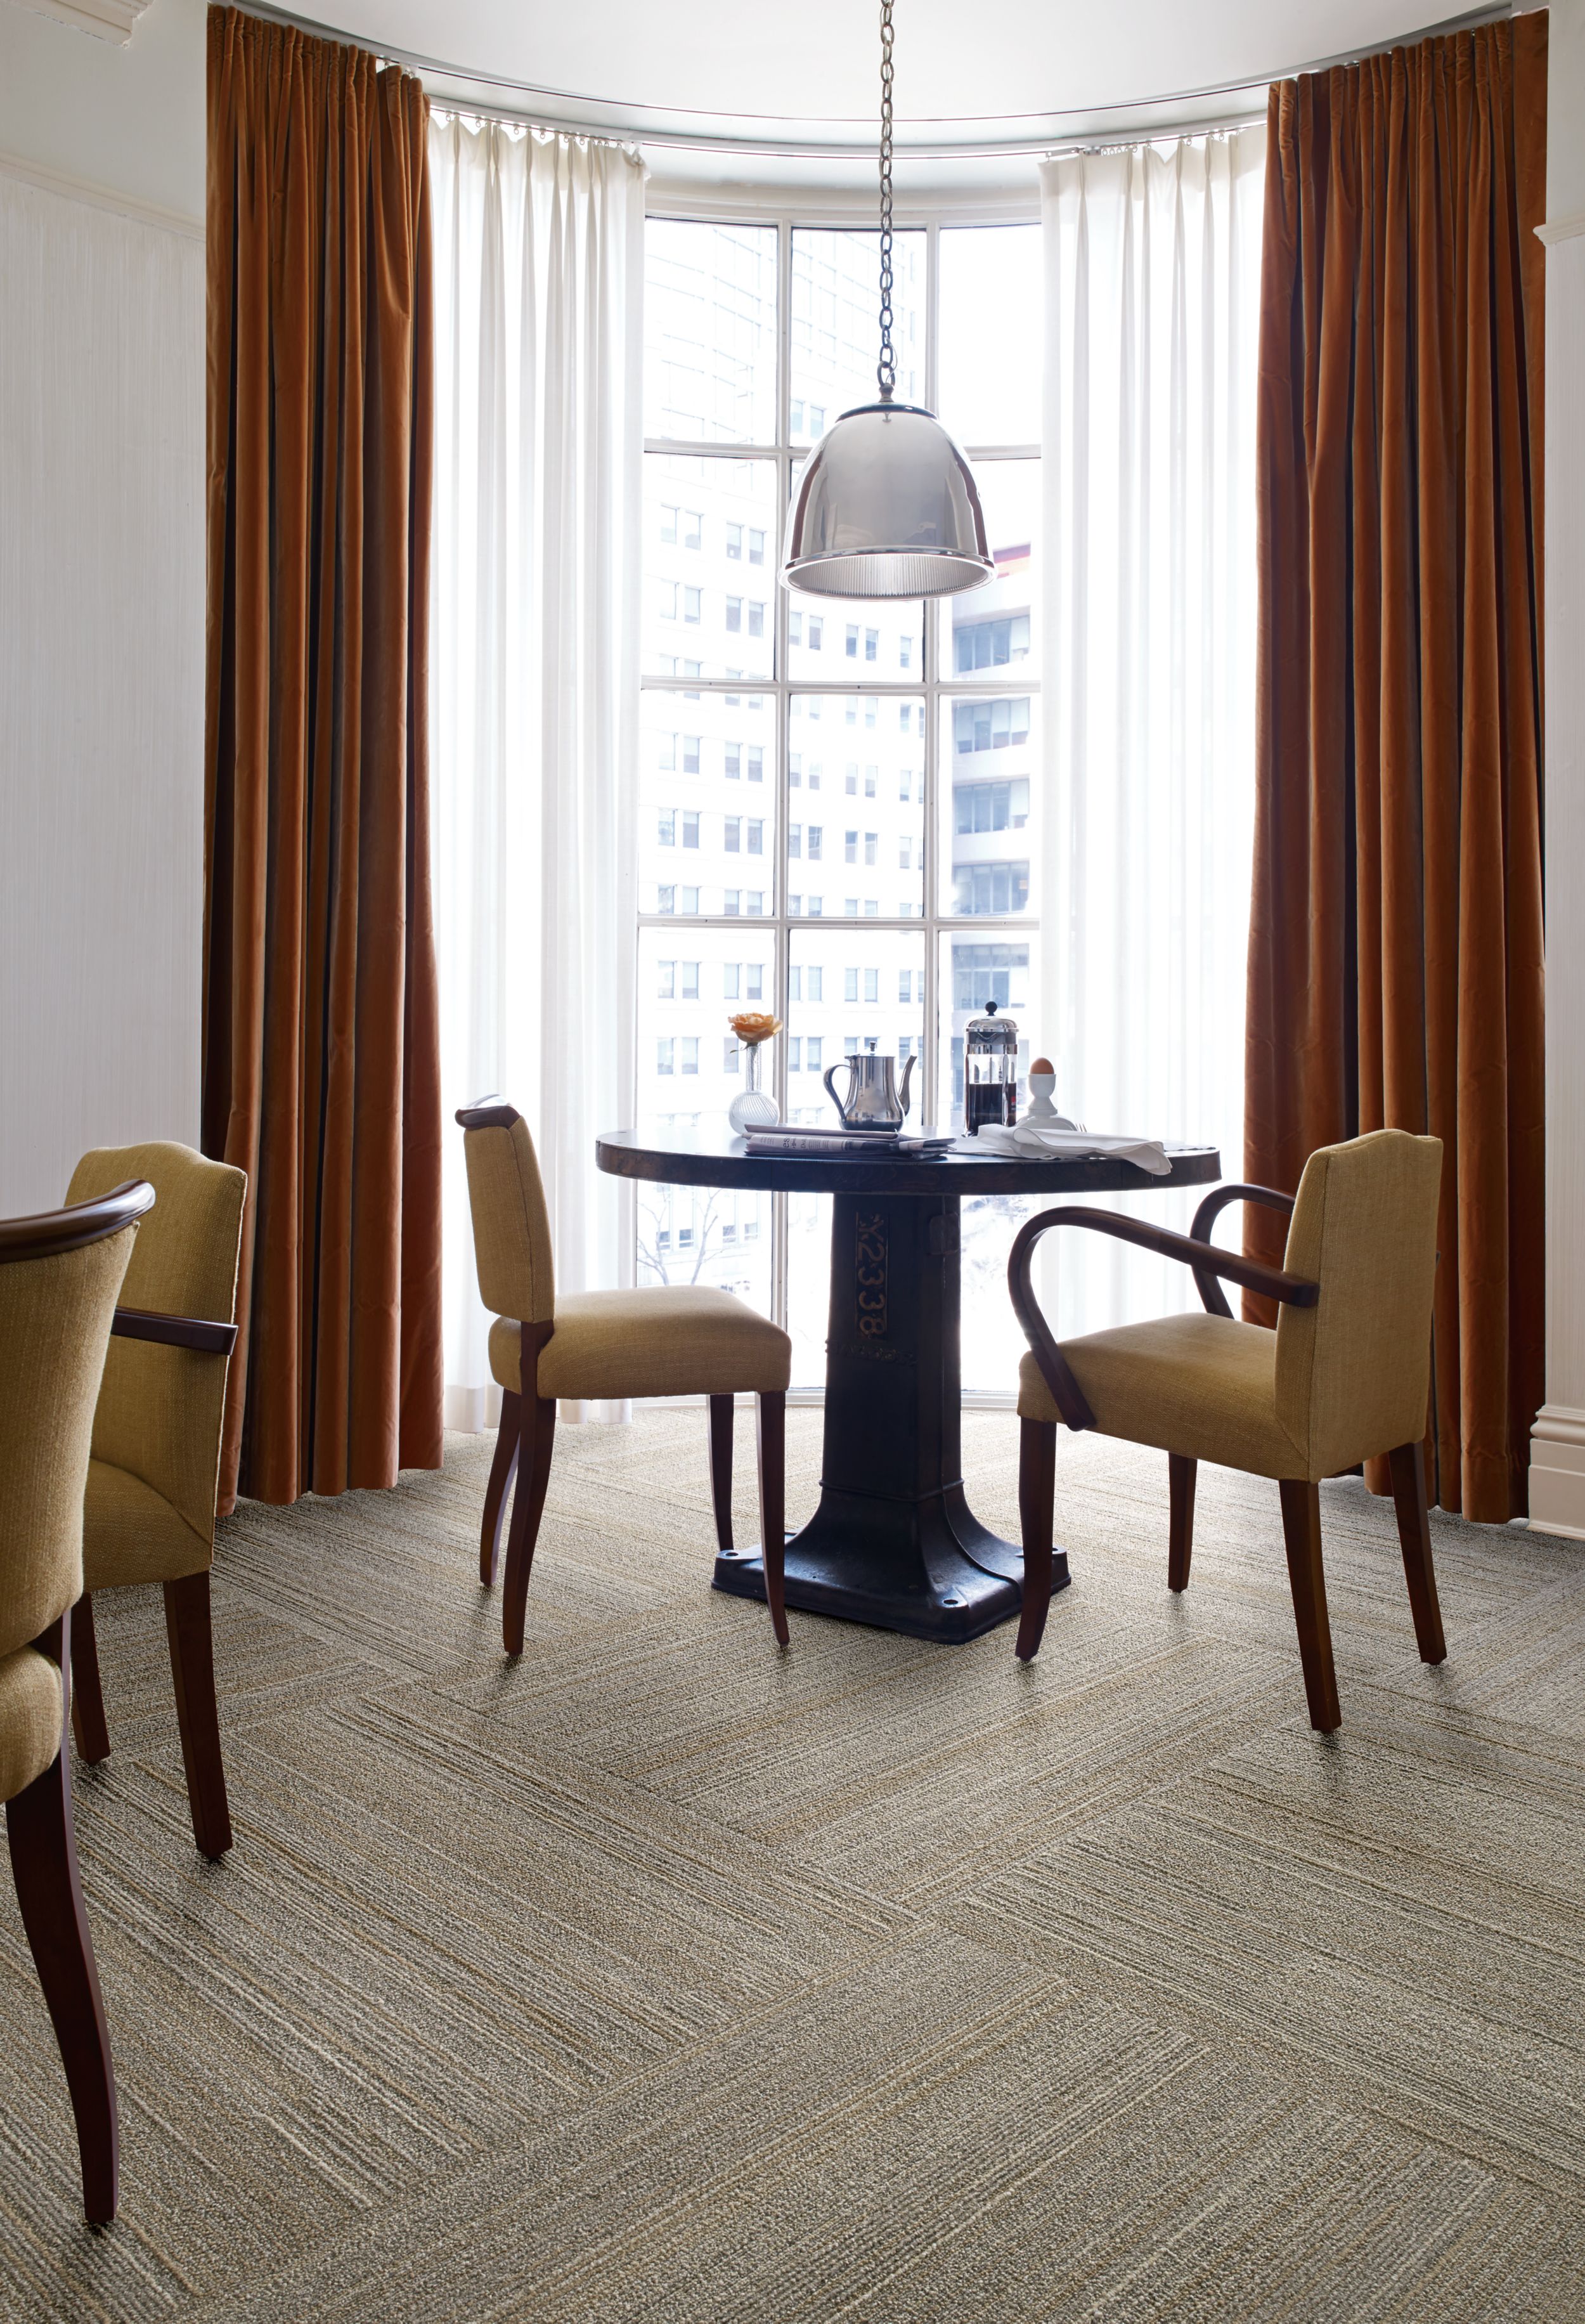 Interface NF400 plank carpet tile at small breakfast table in front of window número de imagen 3